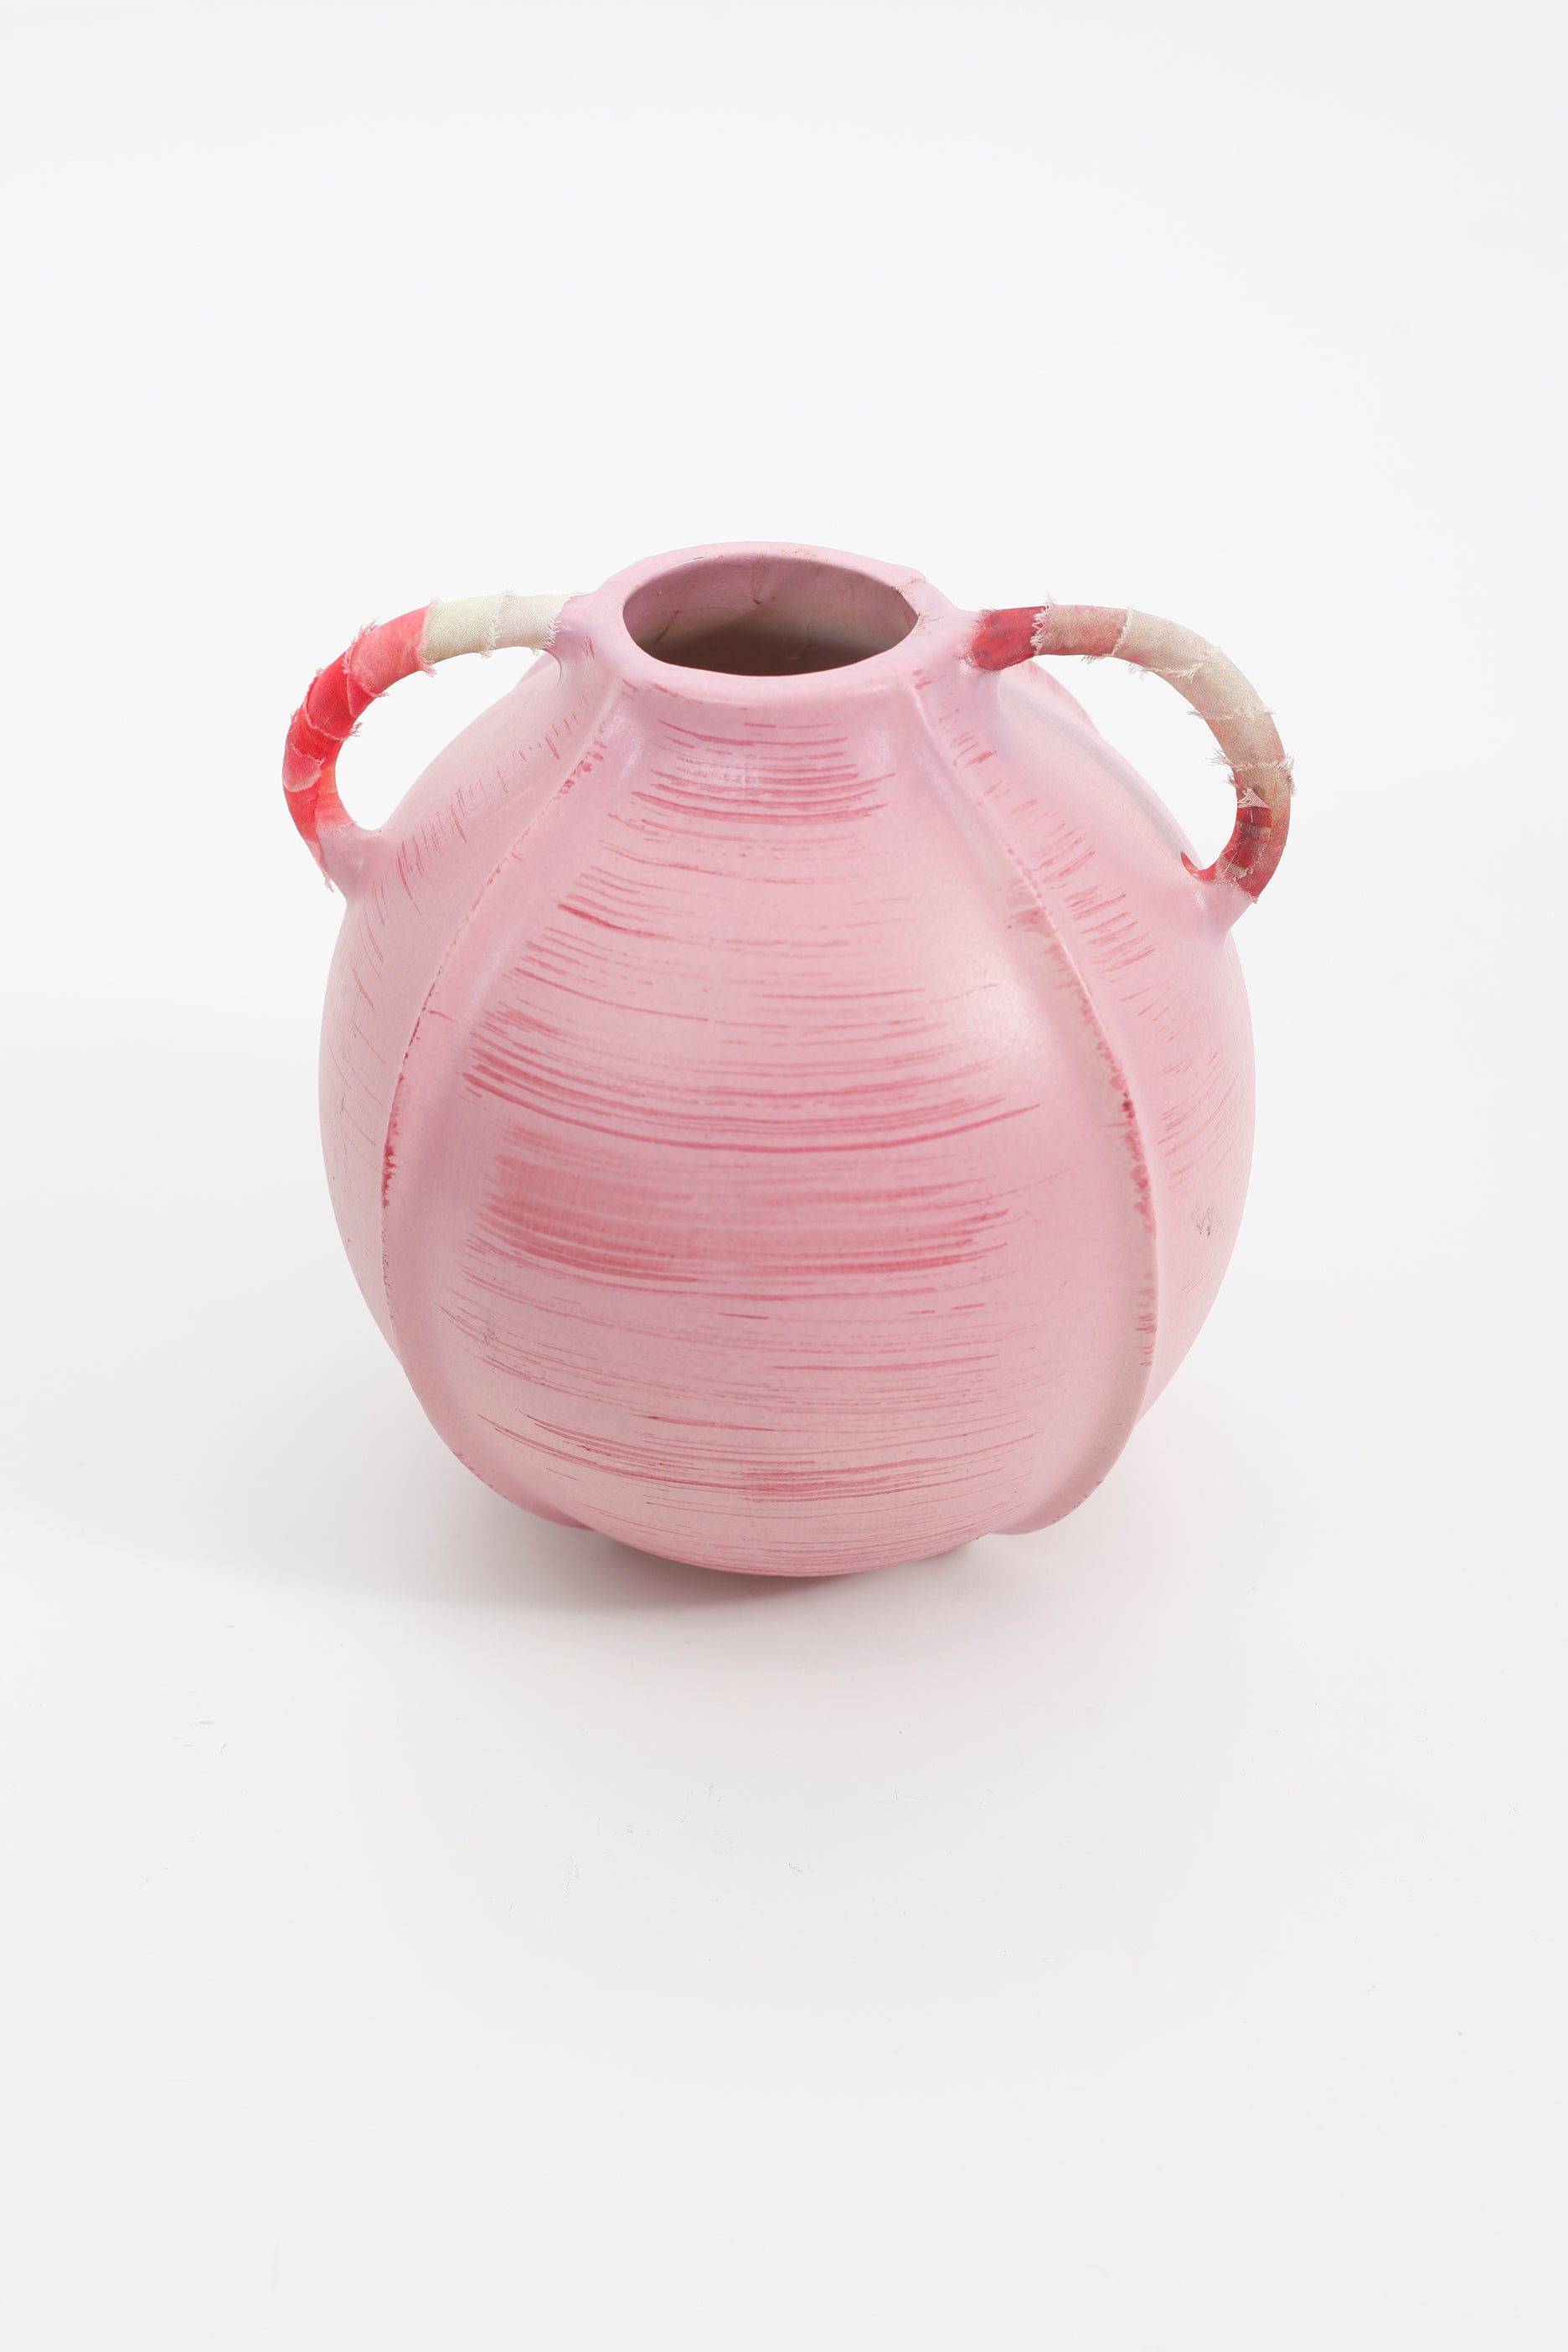 Small Pink Round Ceramic Vase with Handles